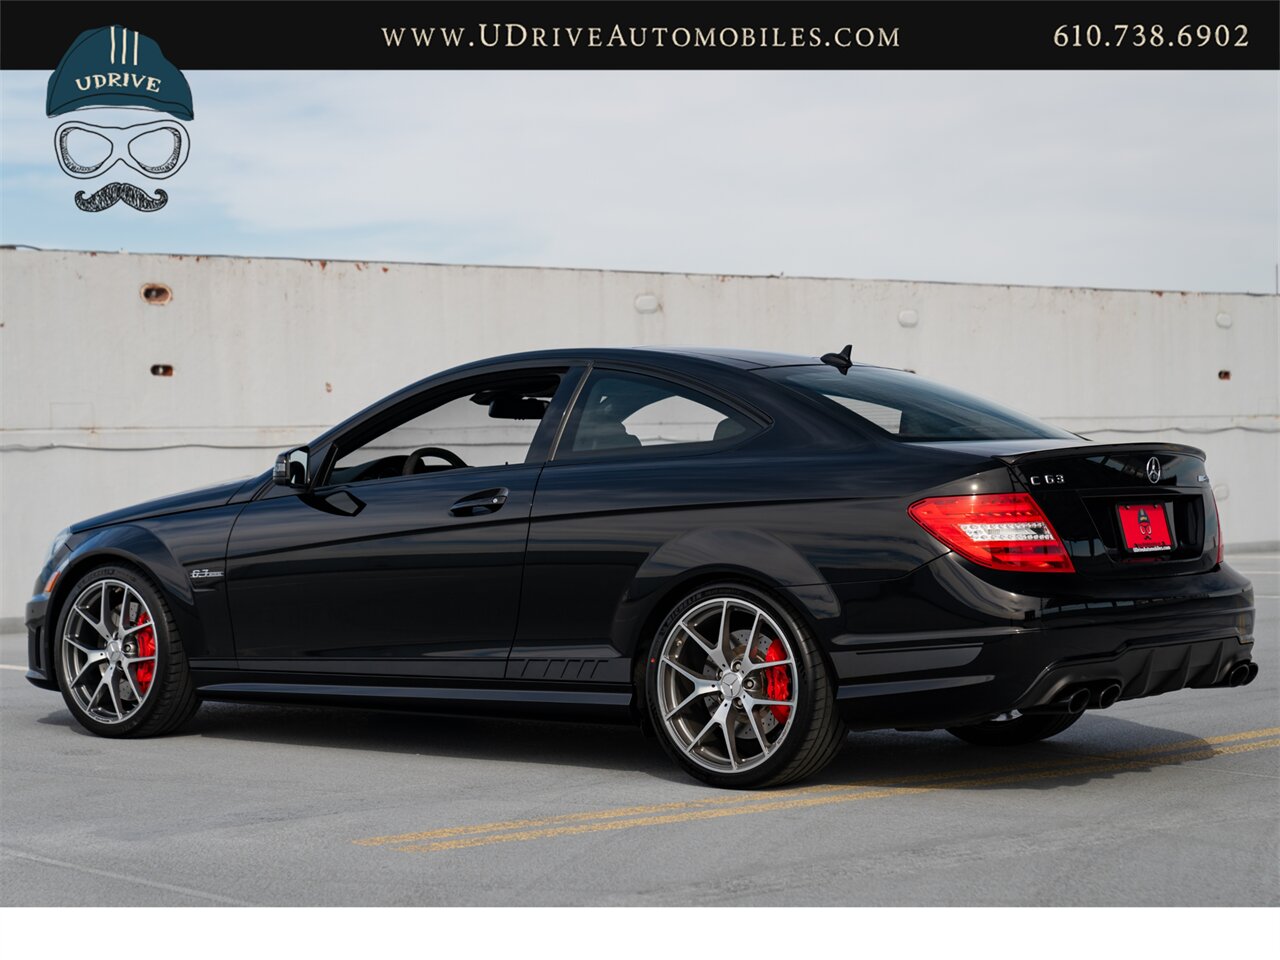 2015 Mercedes-Benz C63 AMG  Edition 507 17k Miles Pano Sunroof Locking Diff 507hp - Photo 23 - West Chester, PA 19382